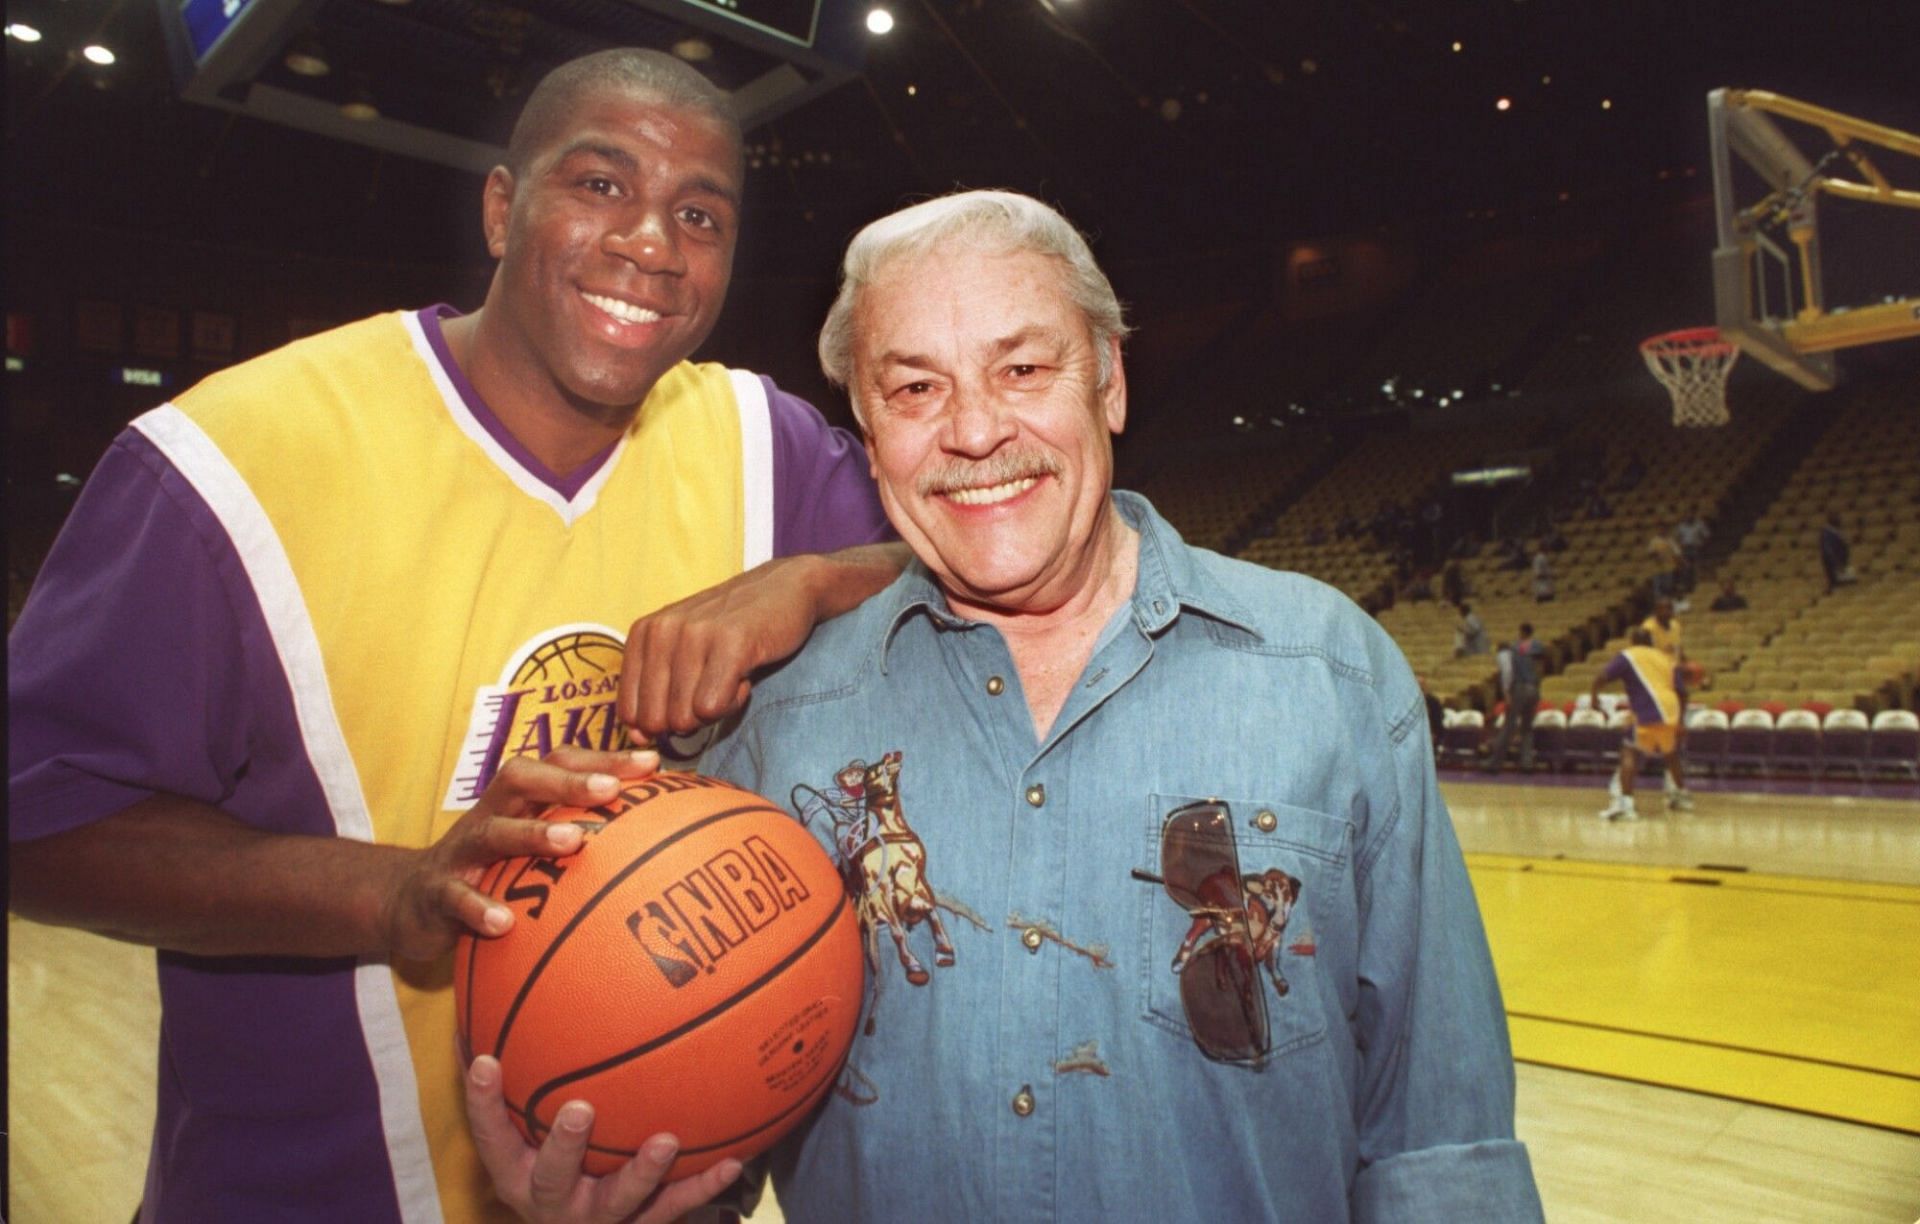 Former LA Lakers superstar Magic Johnson and the late Dr. Jerry Buss